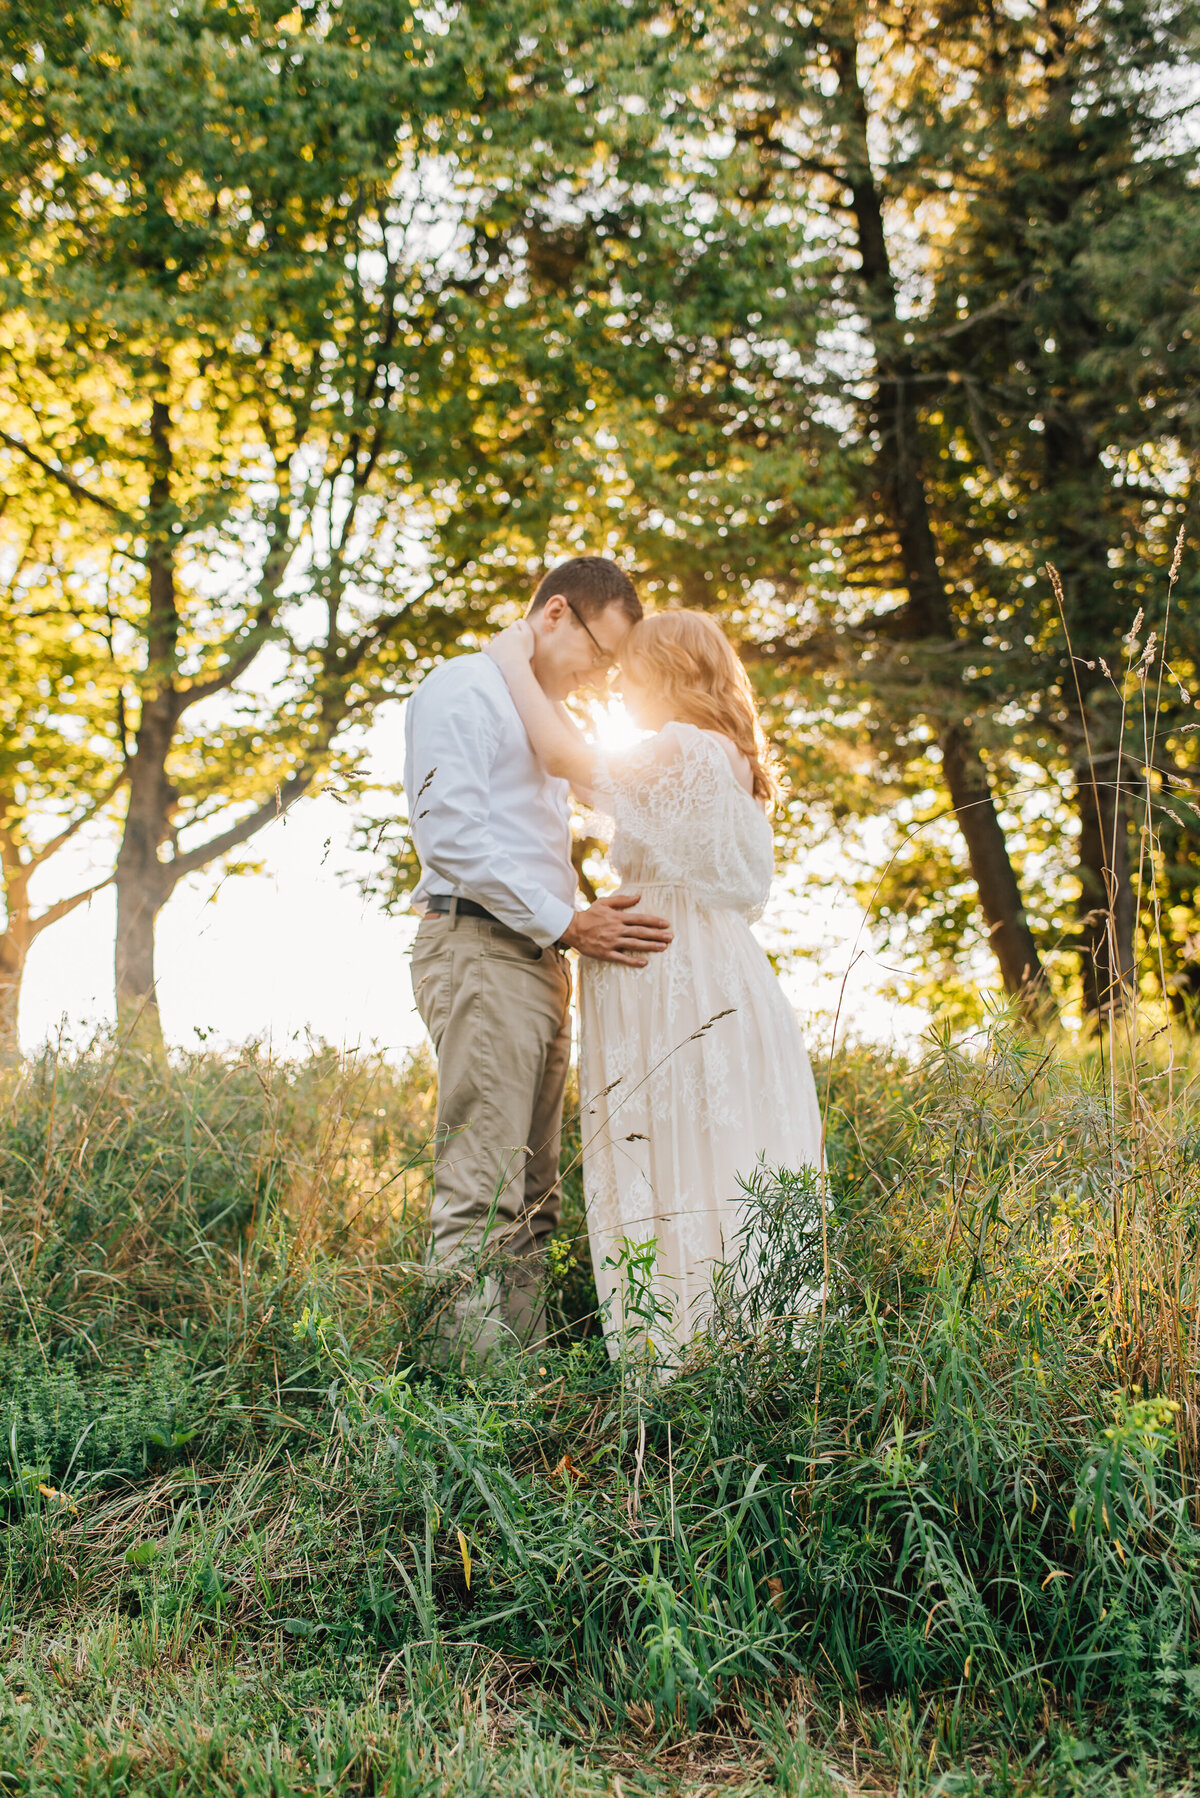 Expecting mom and dad embracing in tall grass at sunset